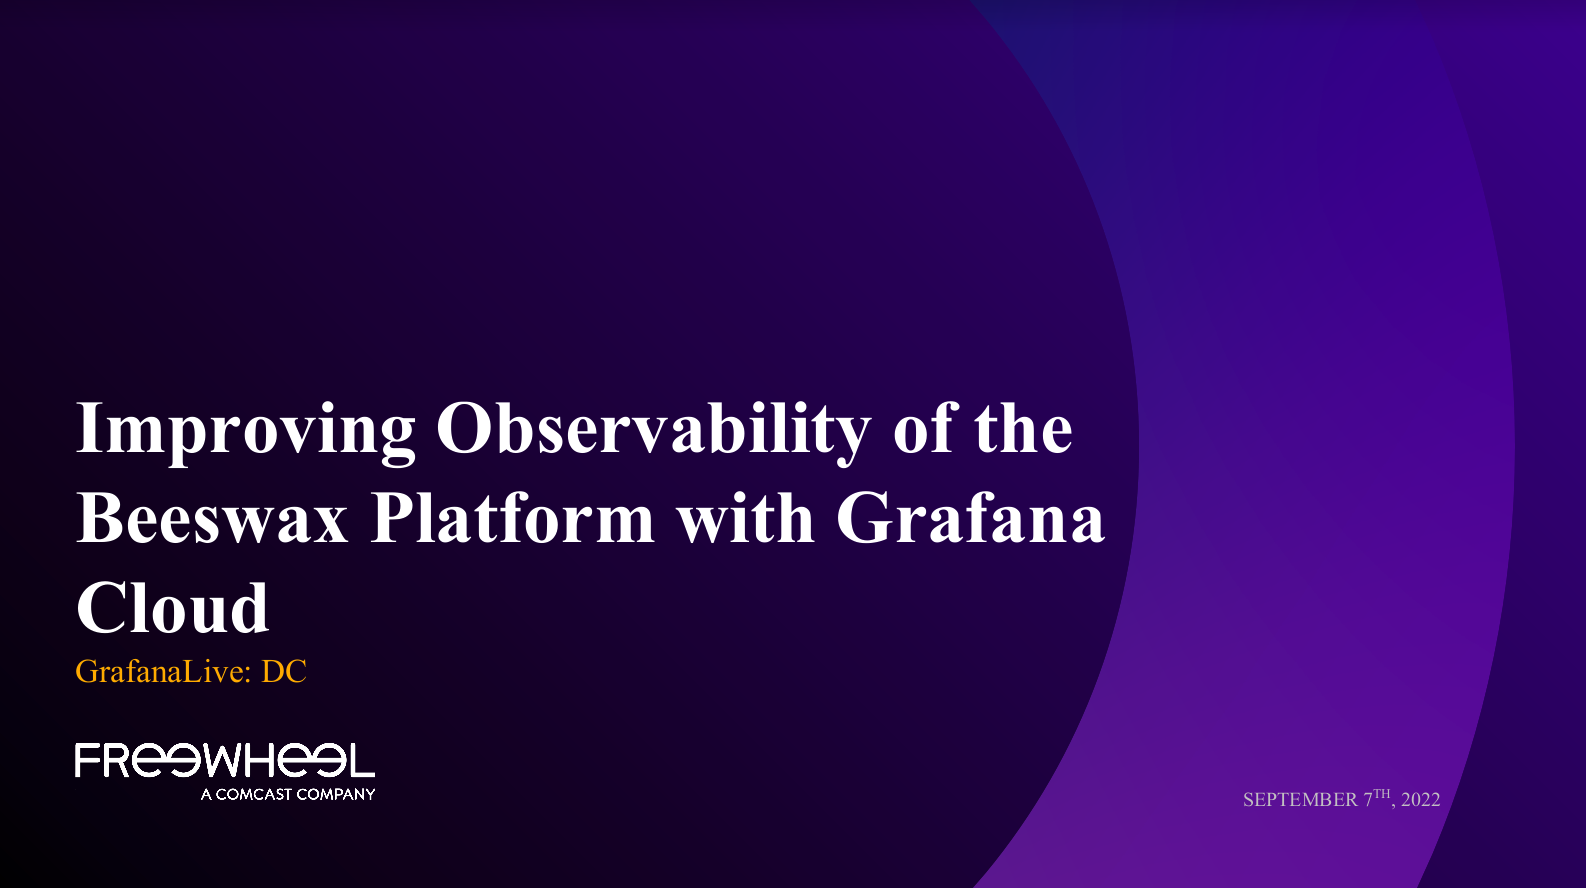 Improving Observability of the Beeswax platform with Grafana Cloud